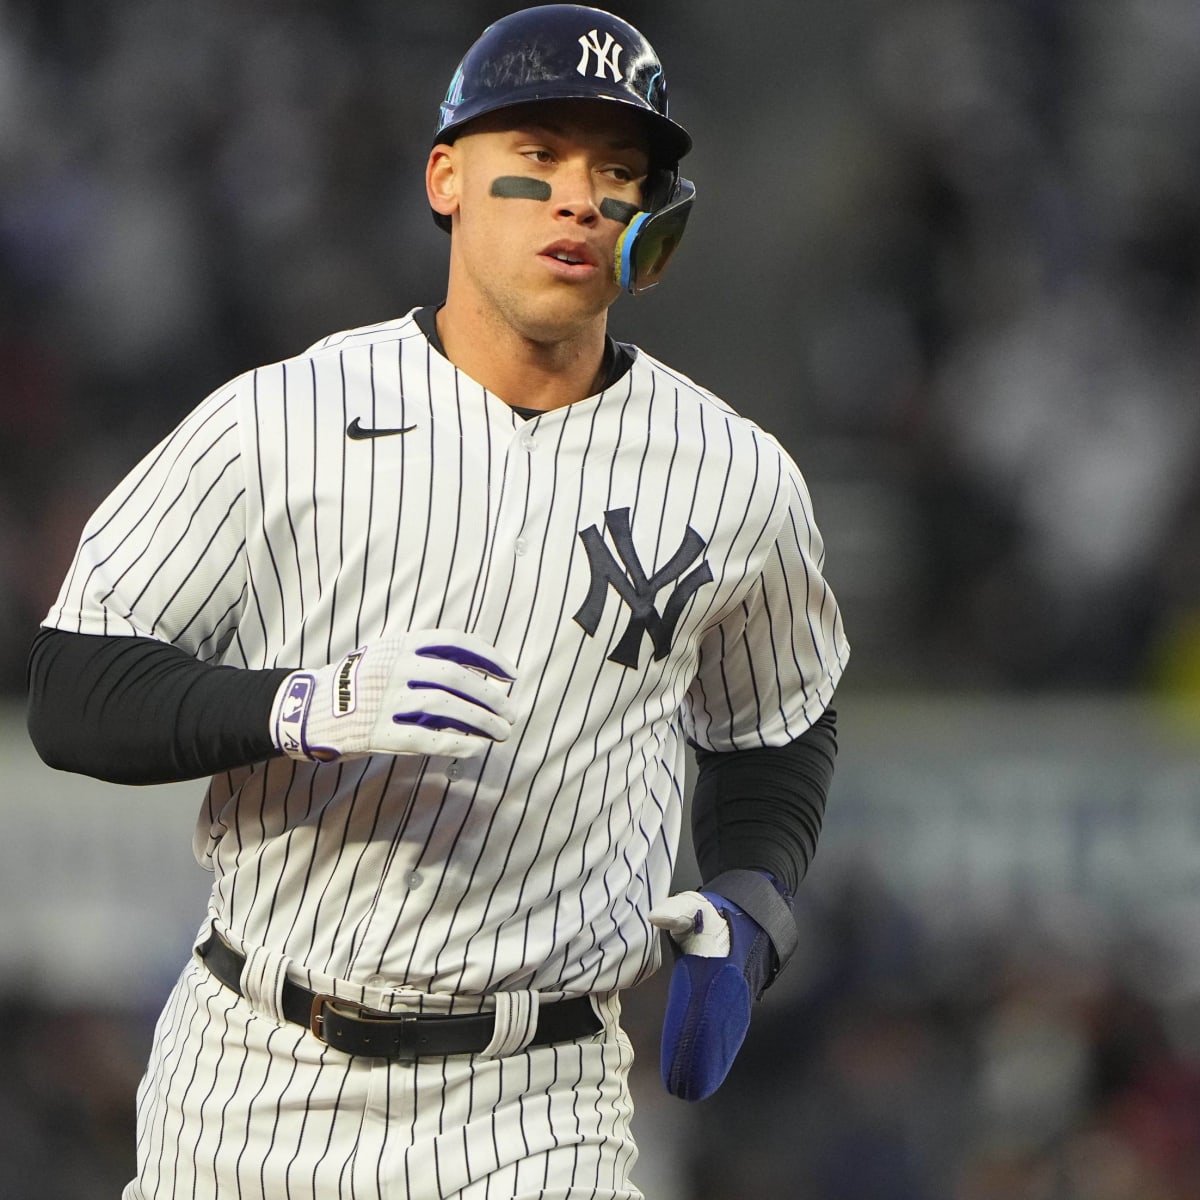 Aaron Judge meets young Yankees fan from viral home run moment